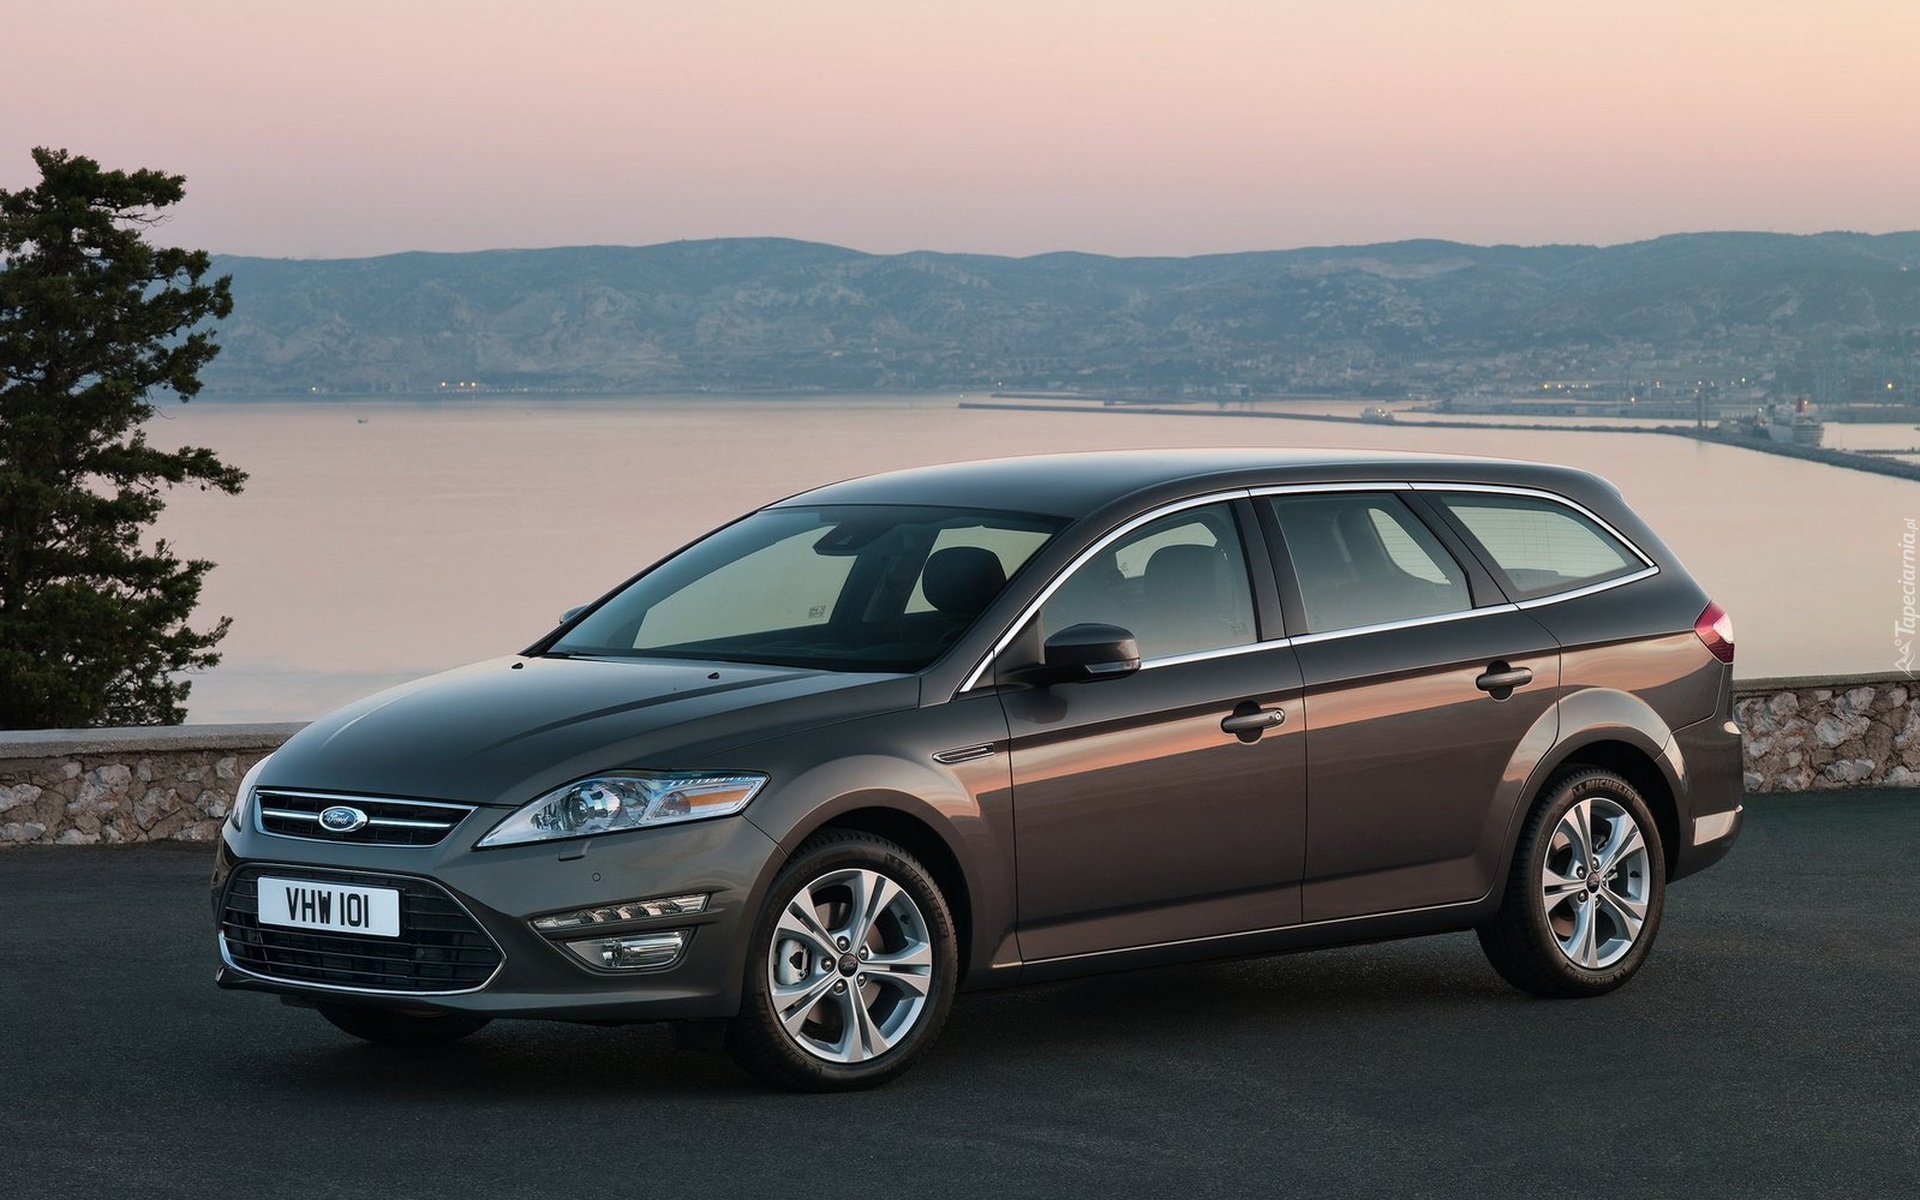 Ford Mondeo MK 4